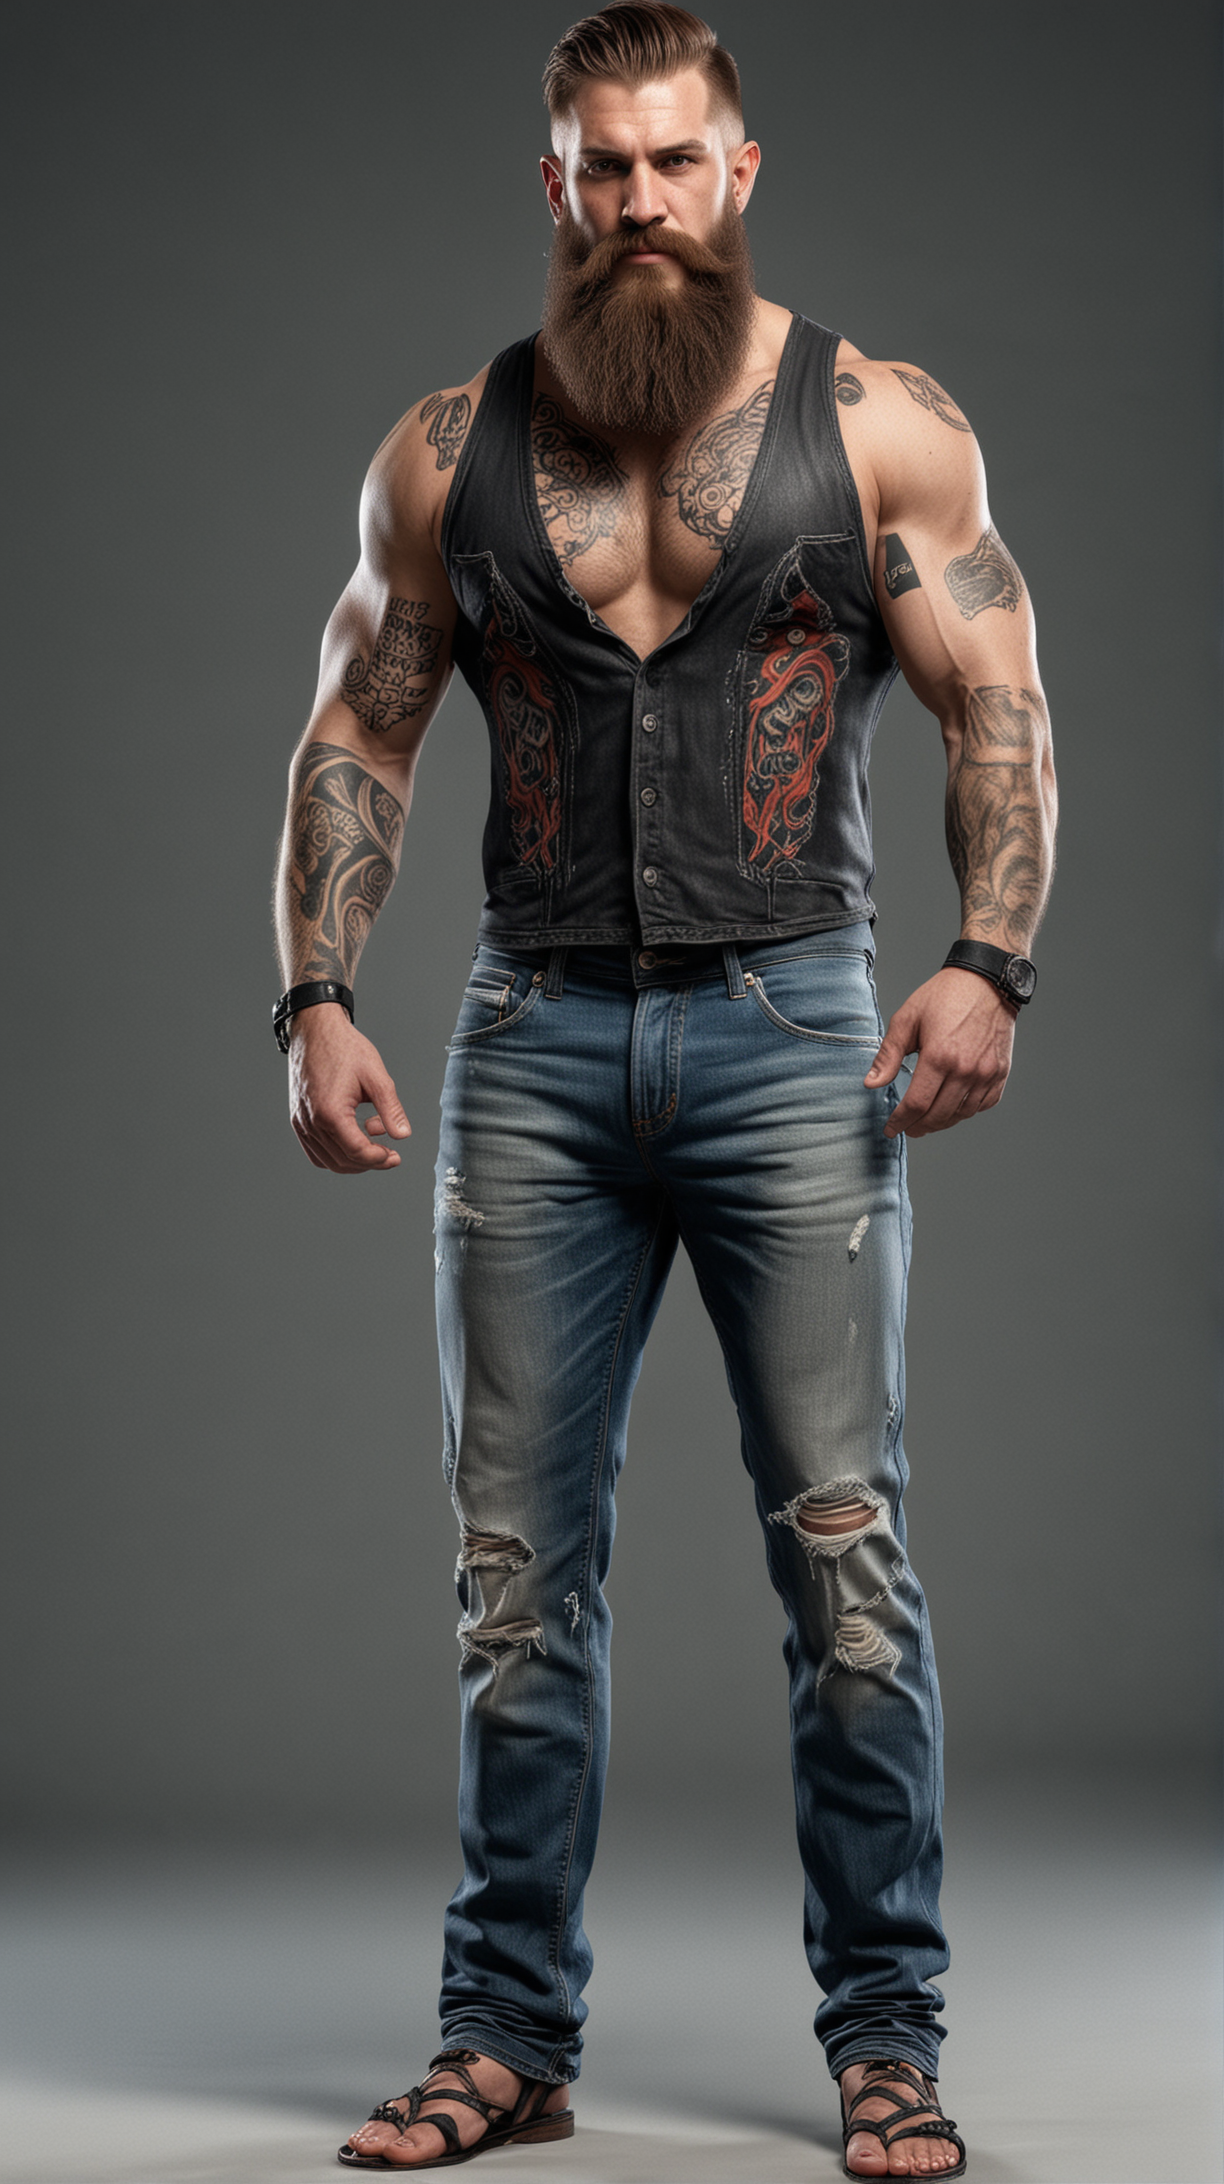 Brawny Wrestler with Scars and Tattoos in Tank Top and Jeans